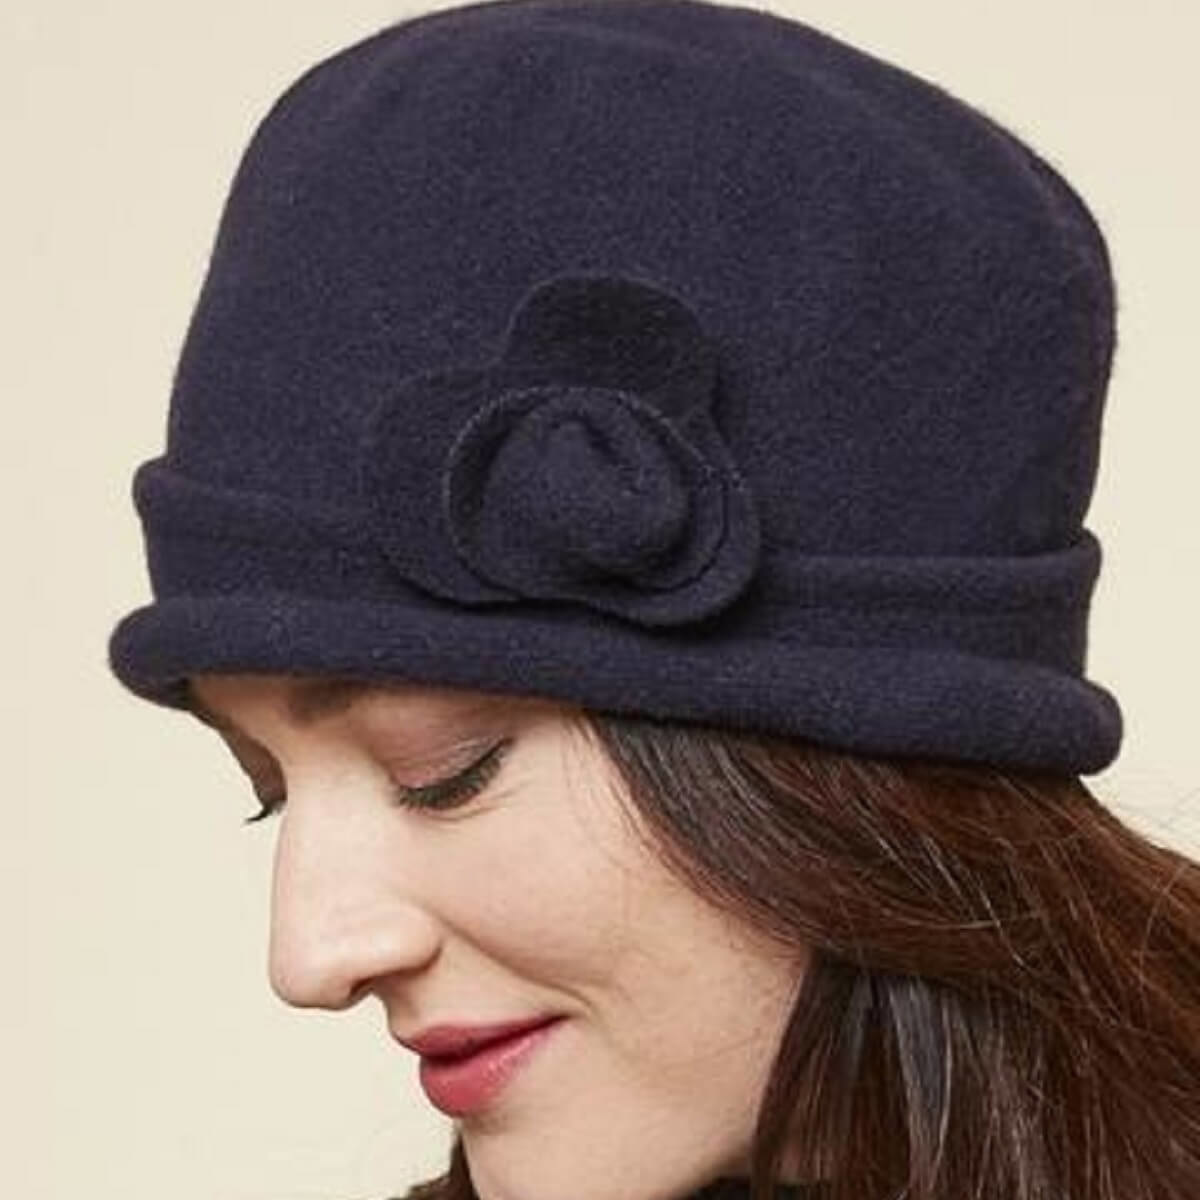 Fashionable, Quality Winter Hats for Women